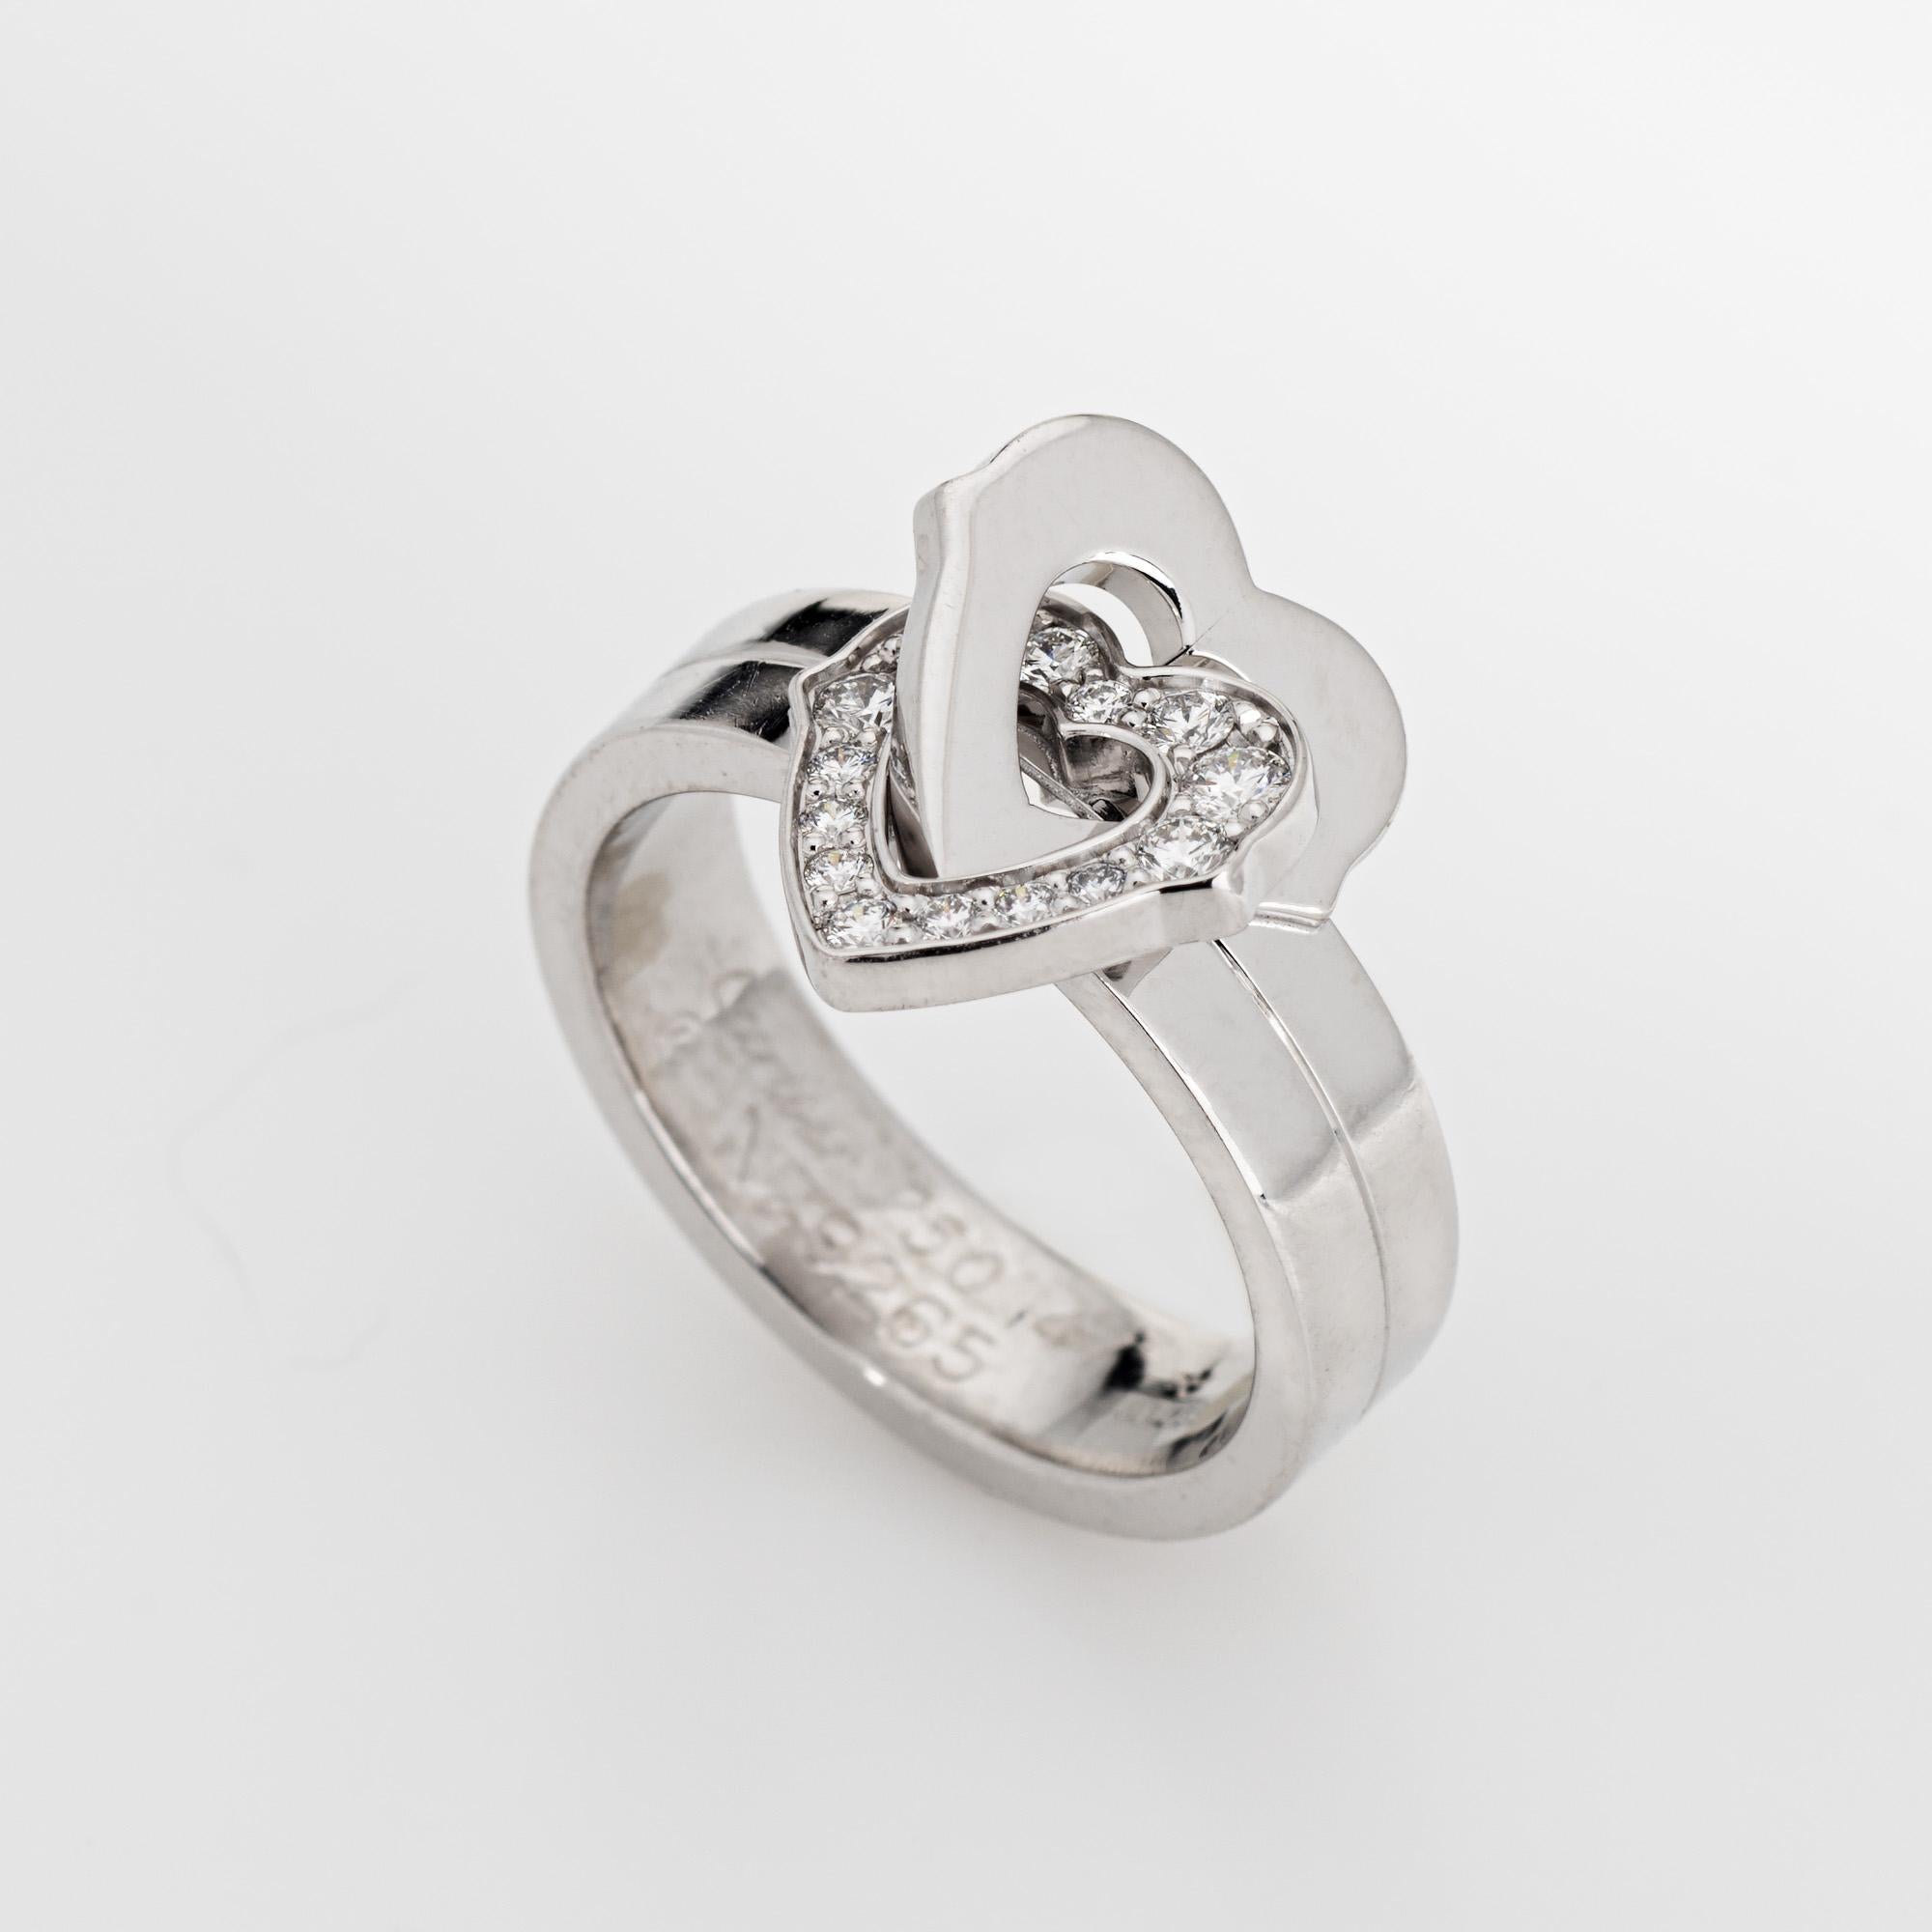 Pre-owned Cartier double heart diamond ring crafted in 18k white gold (circa early 2000s).  

Diamonds total an estimated 0.15 carats (estimated at G-H color and VS1-2 clarity). 

The sweet double heart design is set with diamonds to one of the